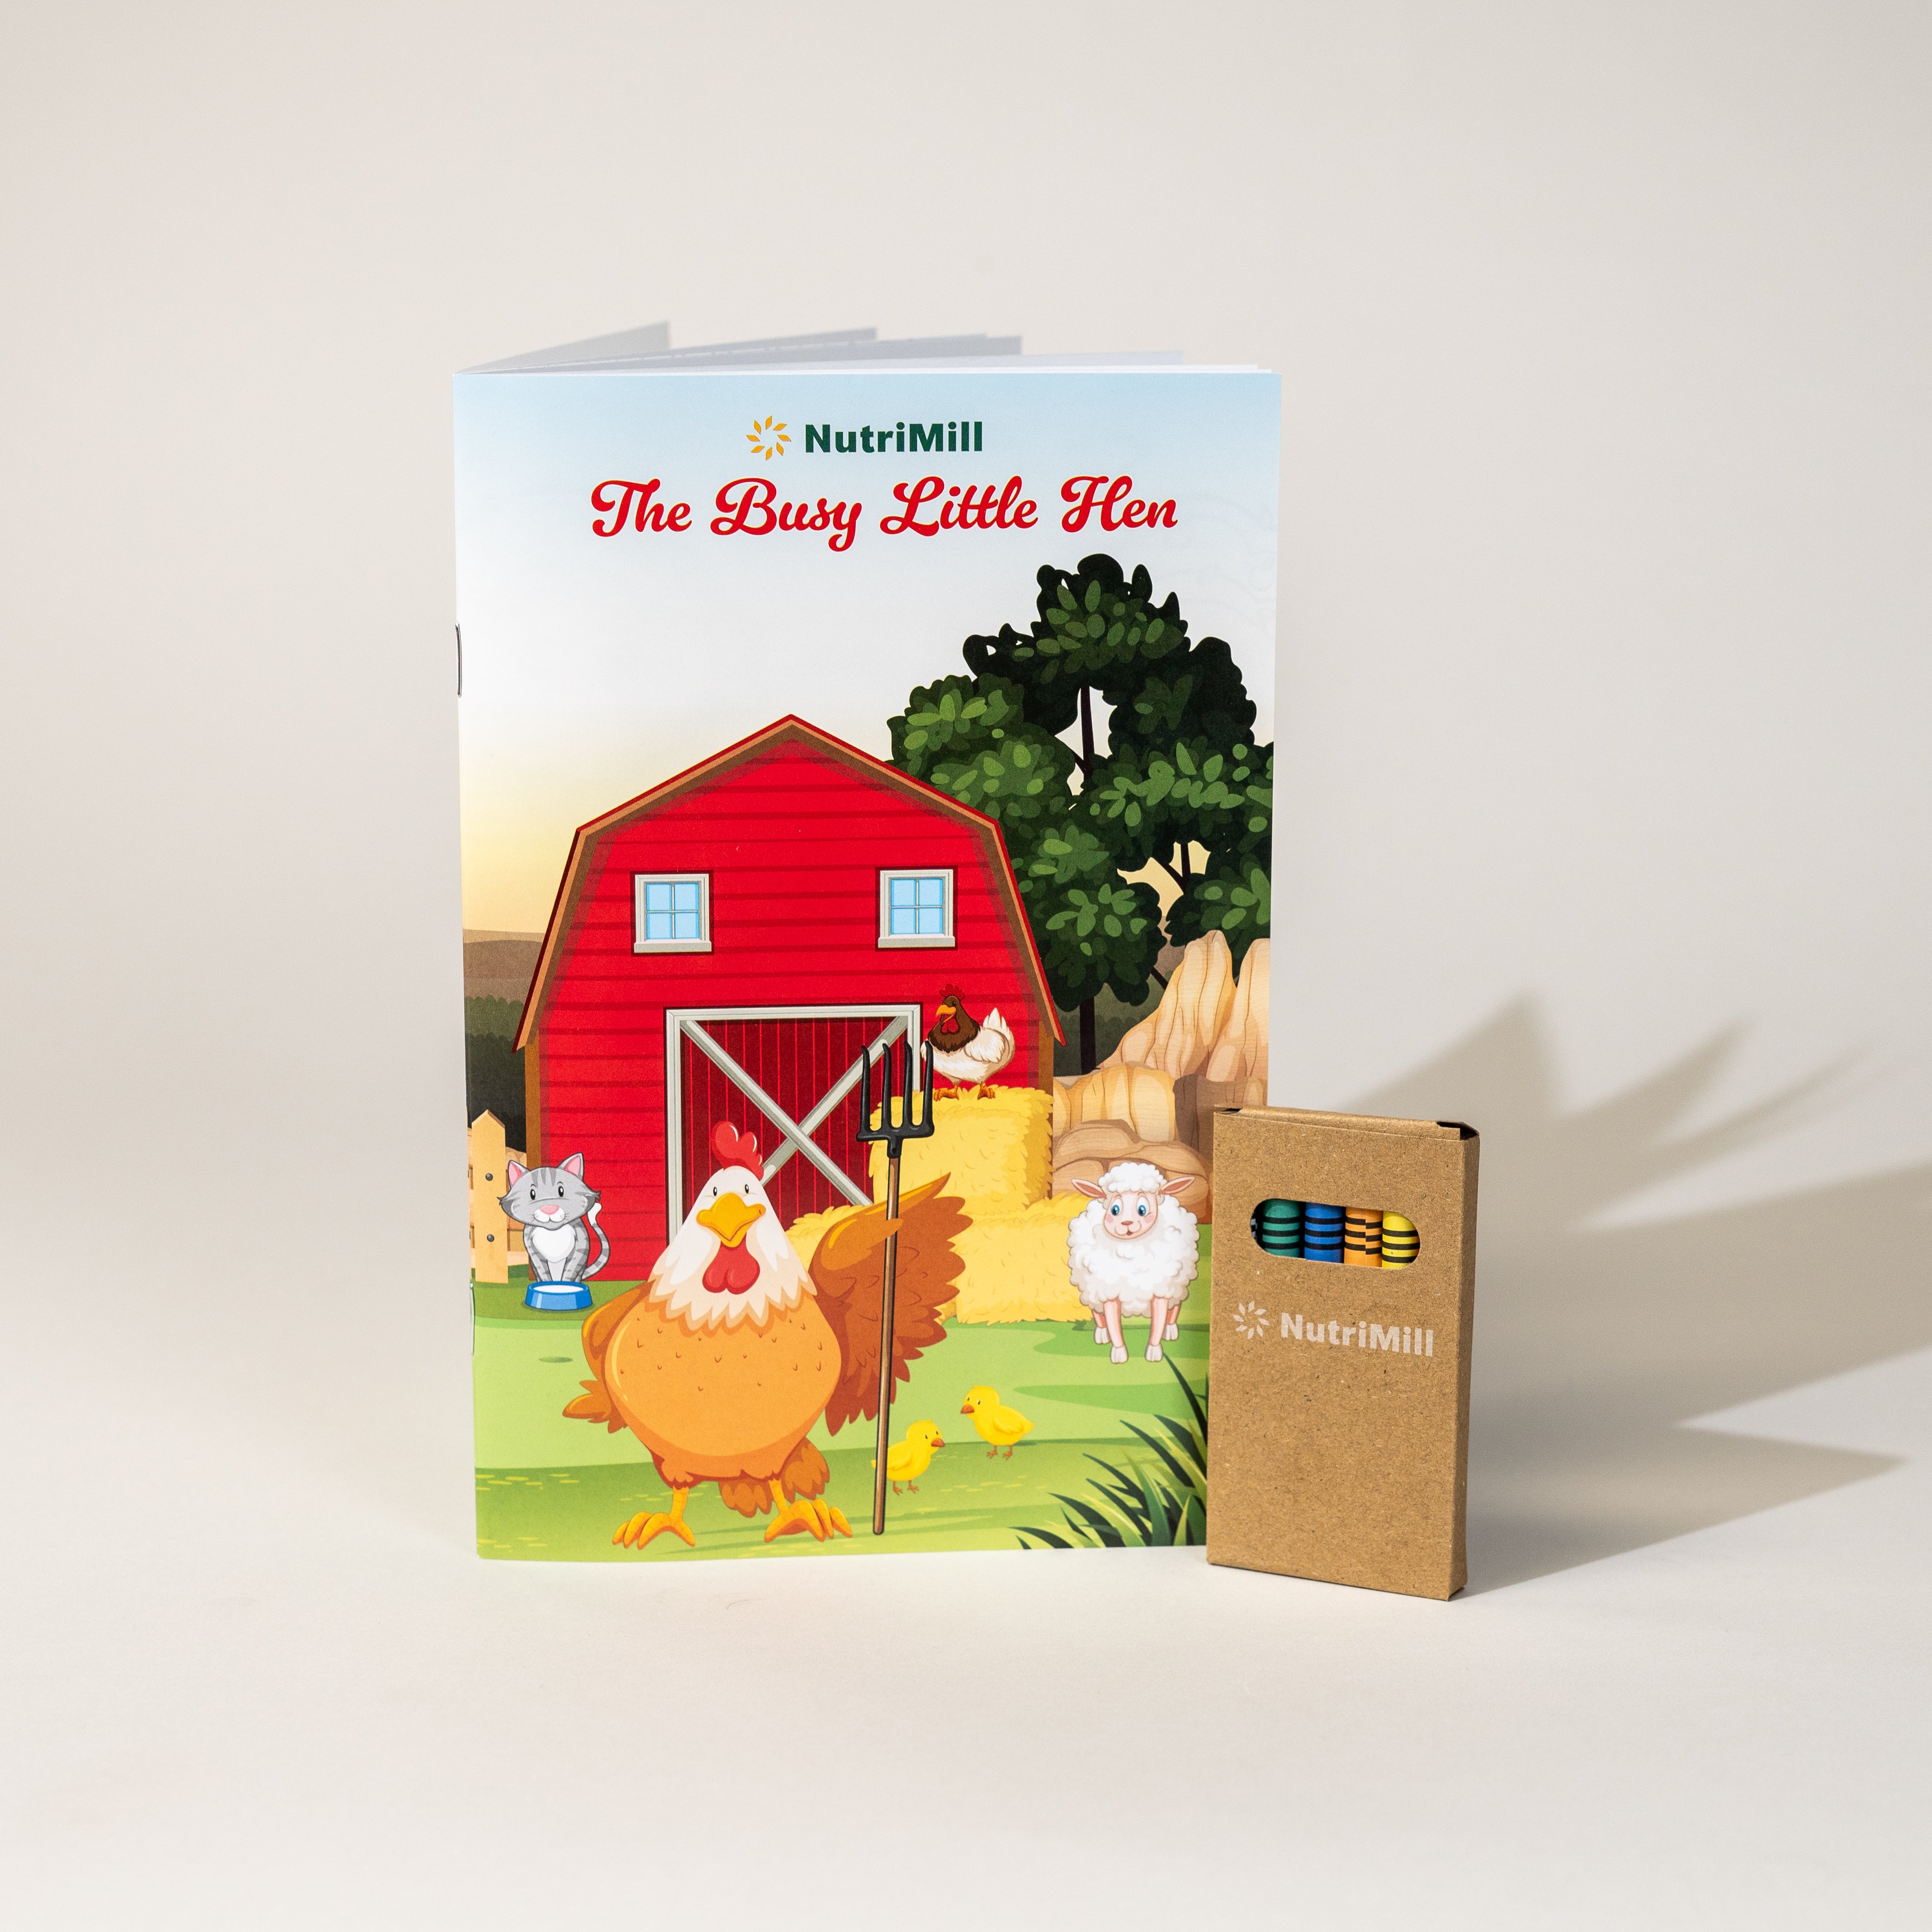 Rice and Grain Cooker – Little Red Hen